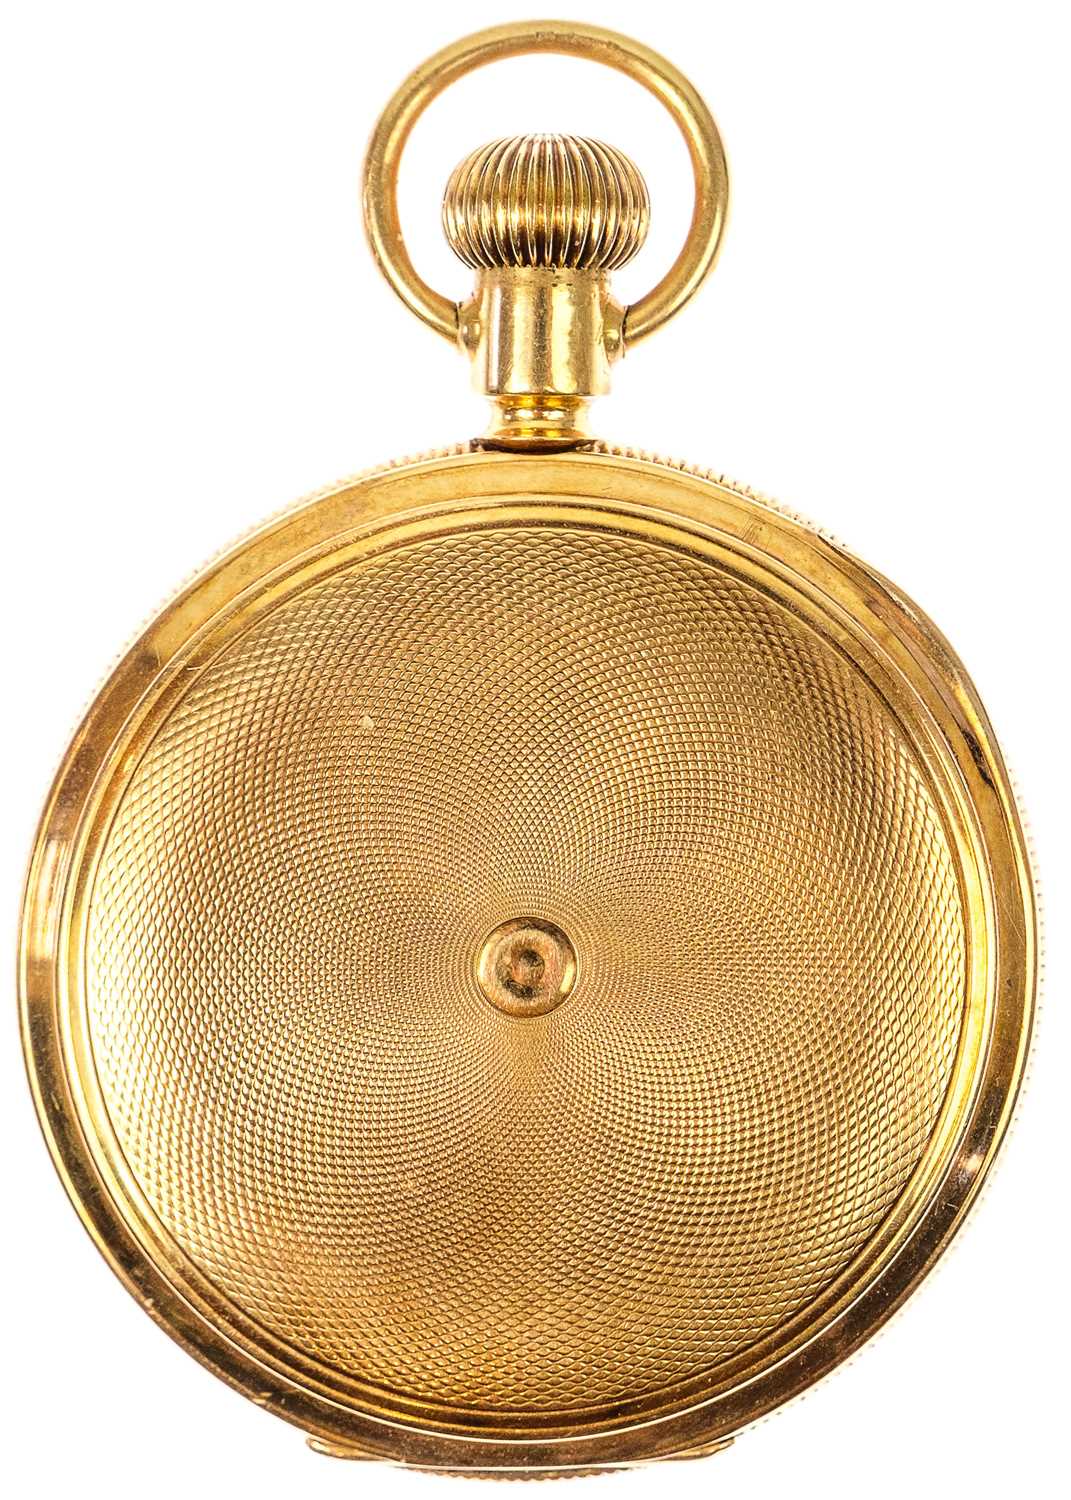 WALTHAM - A 14ct full hunter crown wind pocket watch. - Image 6 of 7